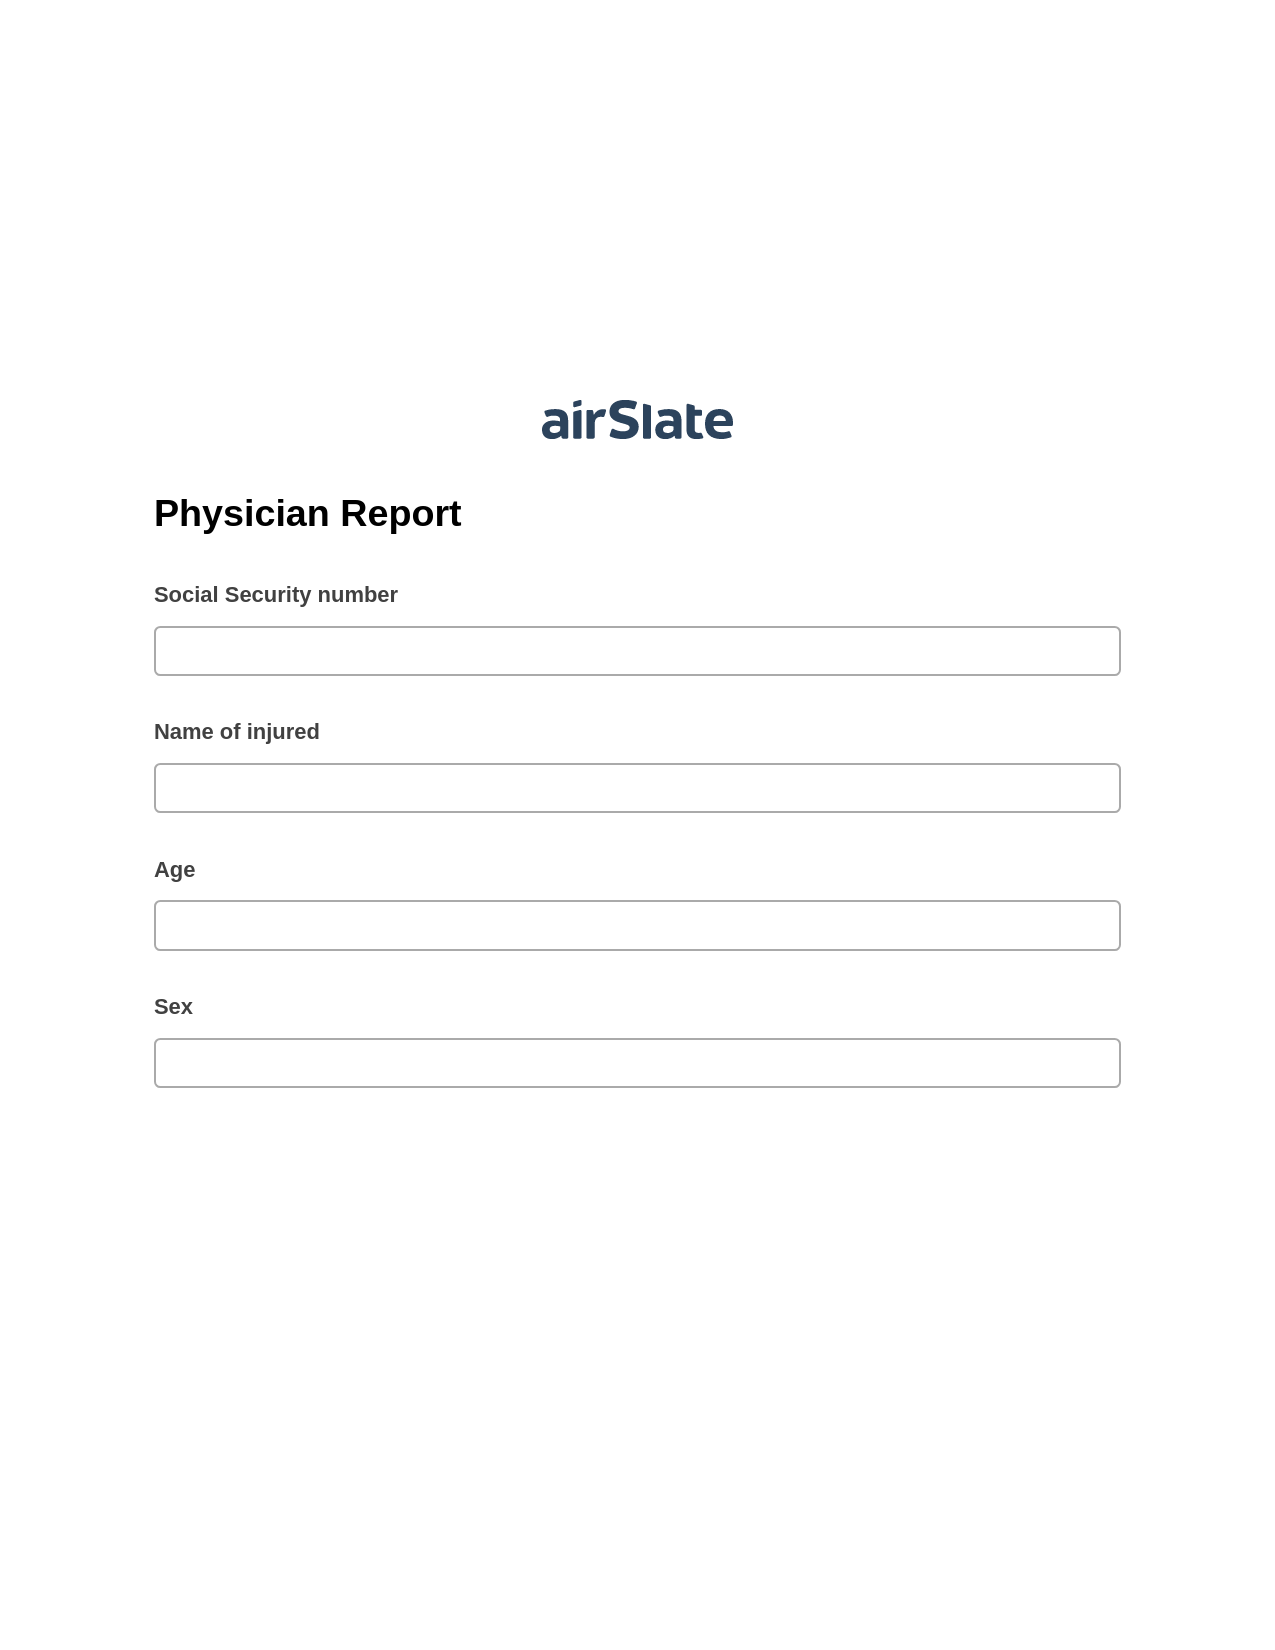 Physician Report Pre-fill from Excel Spreadsheet Bot, Open under a Role Bot, Post-finish Document Bot